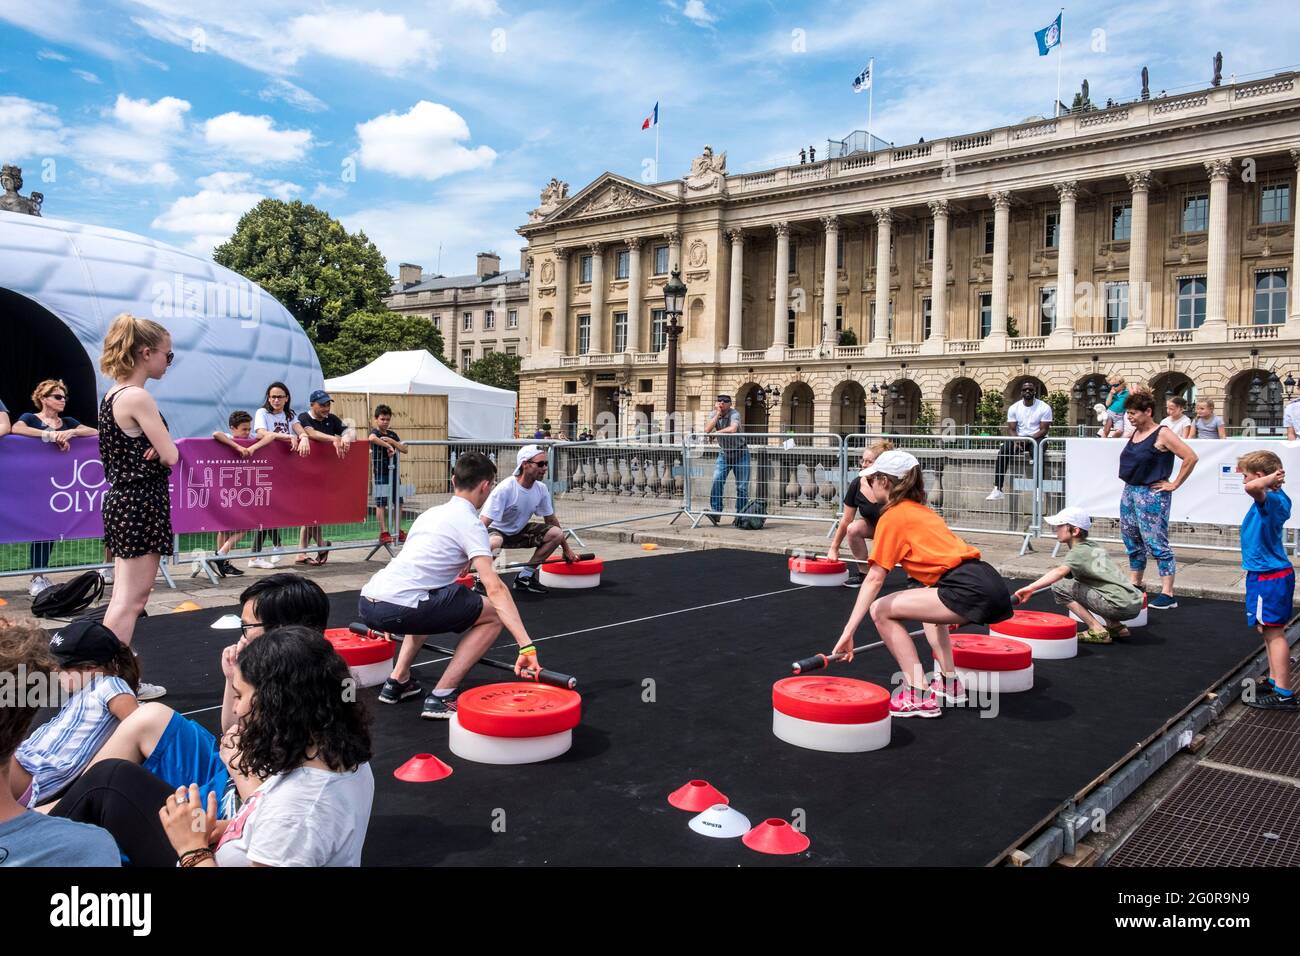 FRANCE. PARIS (8TH DISTRICT). OLYMPIC DAY, CONCORDE SQUARE, JUNE 23, 2019. PUBLIC INTRODUCTION TO WEIGHTLIFTING Stock Photo